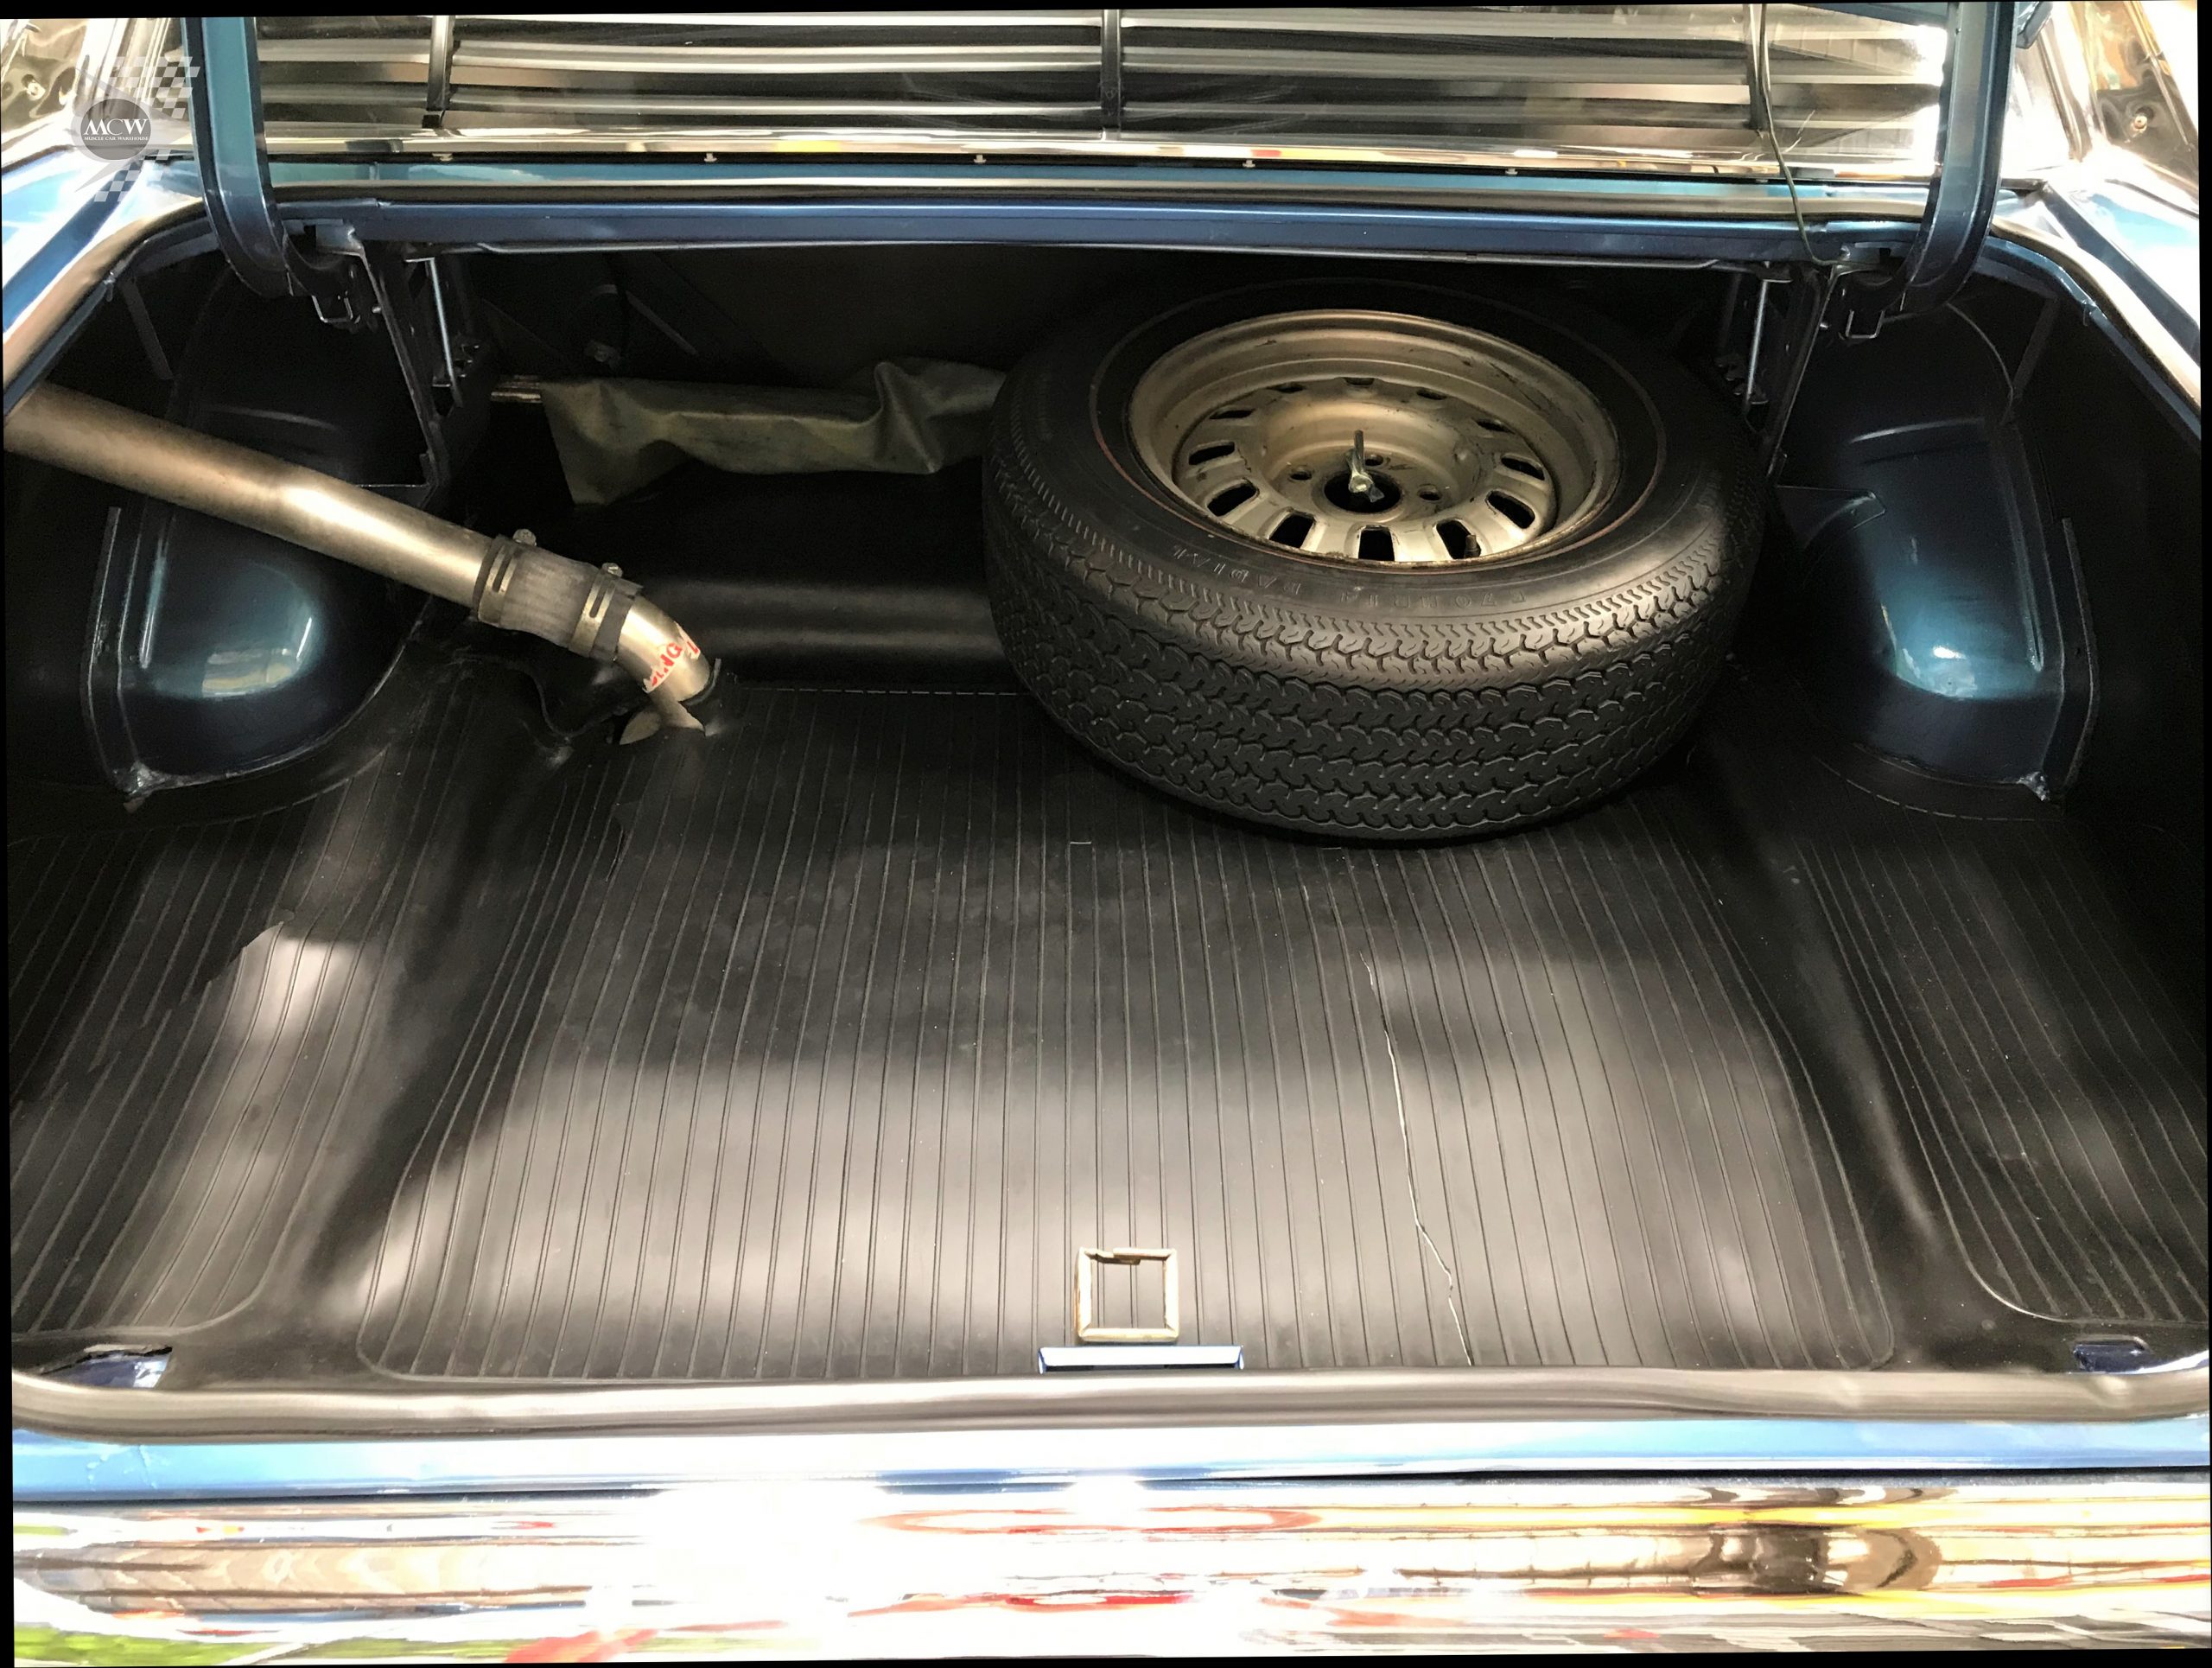 1970 Ford Falcon XW GT Trunk - Muscle Car Warehouse